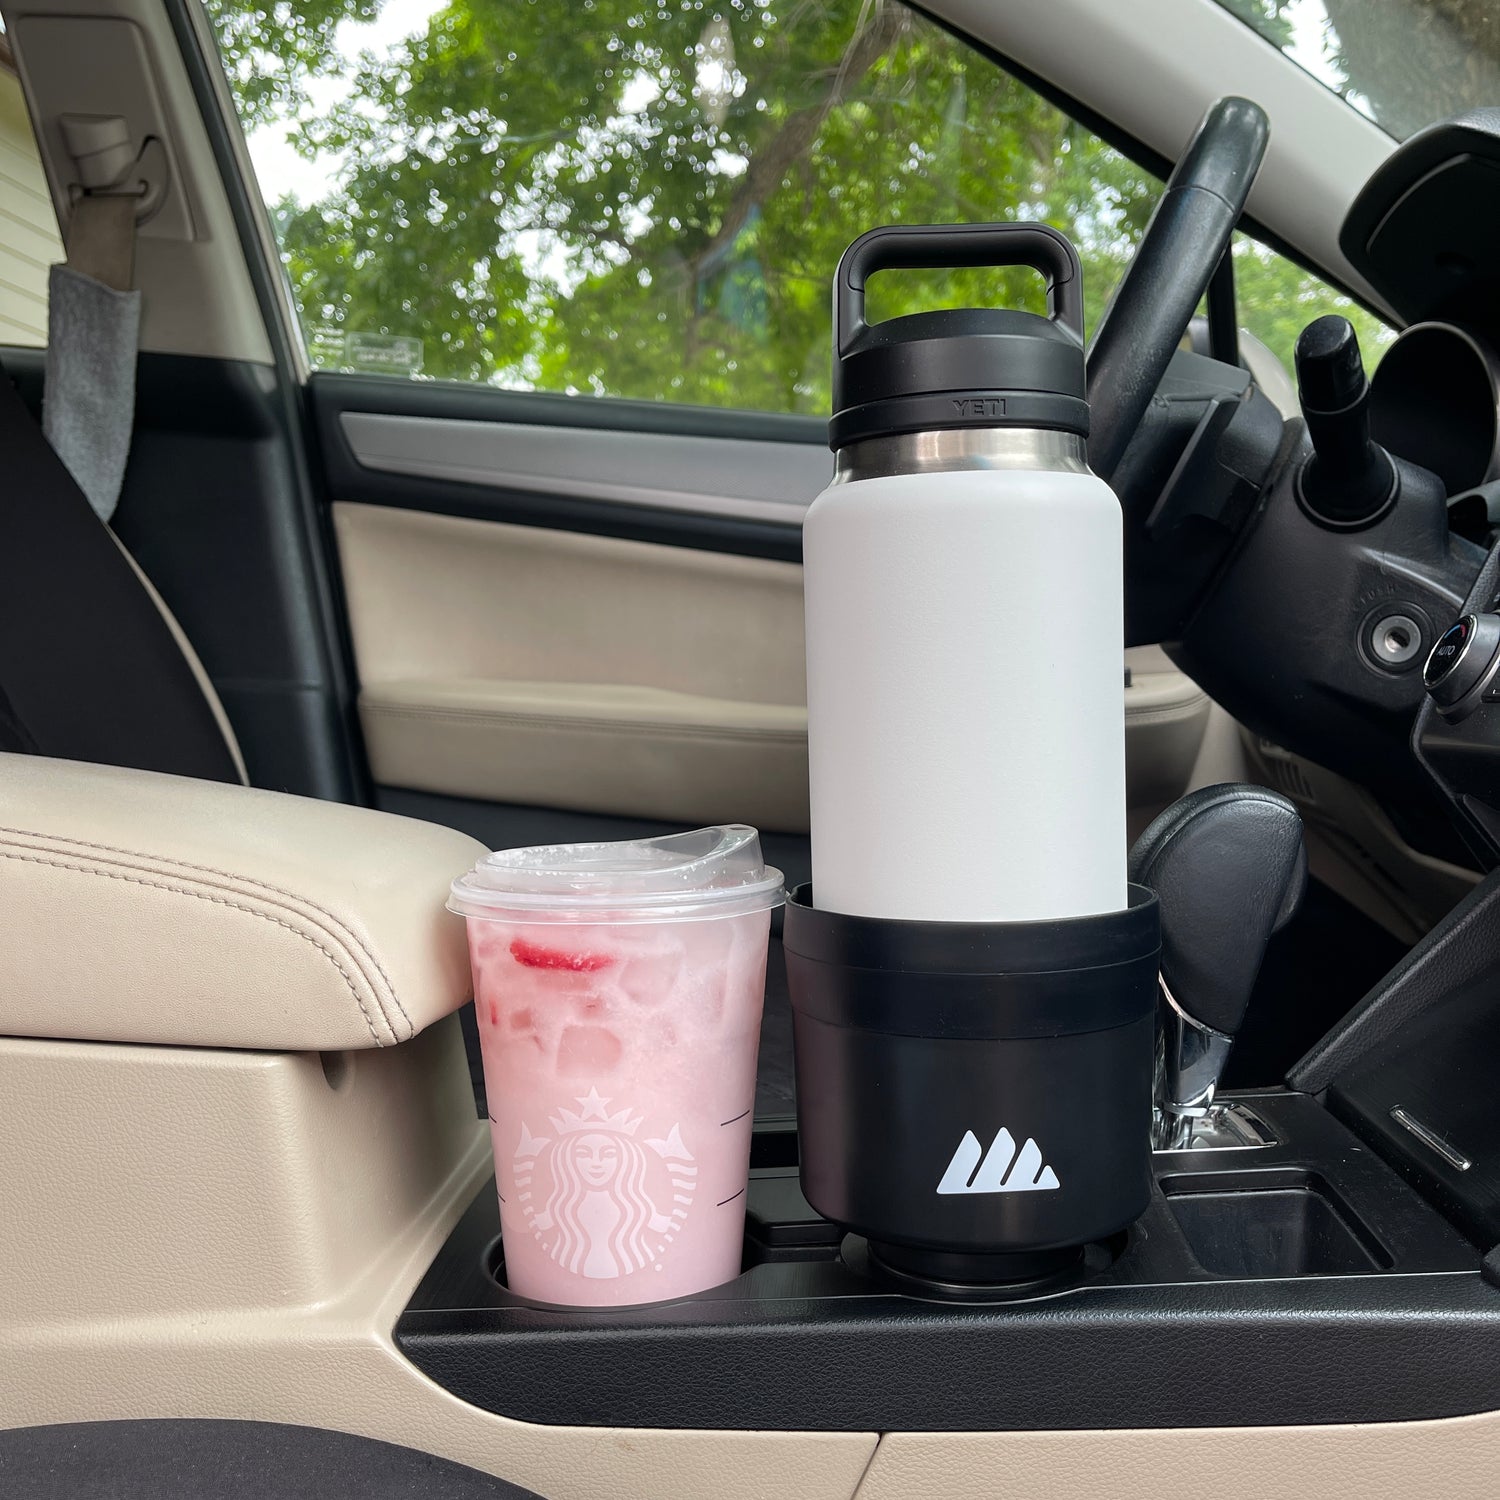 Integral Ultimate Expander Car Cup Holder - Adjustable Base - Expander &  Organizer for Vehicles - Compatible with Coffee Mug, Yeti 14/24/36/46oz